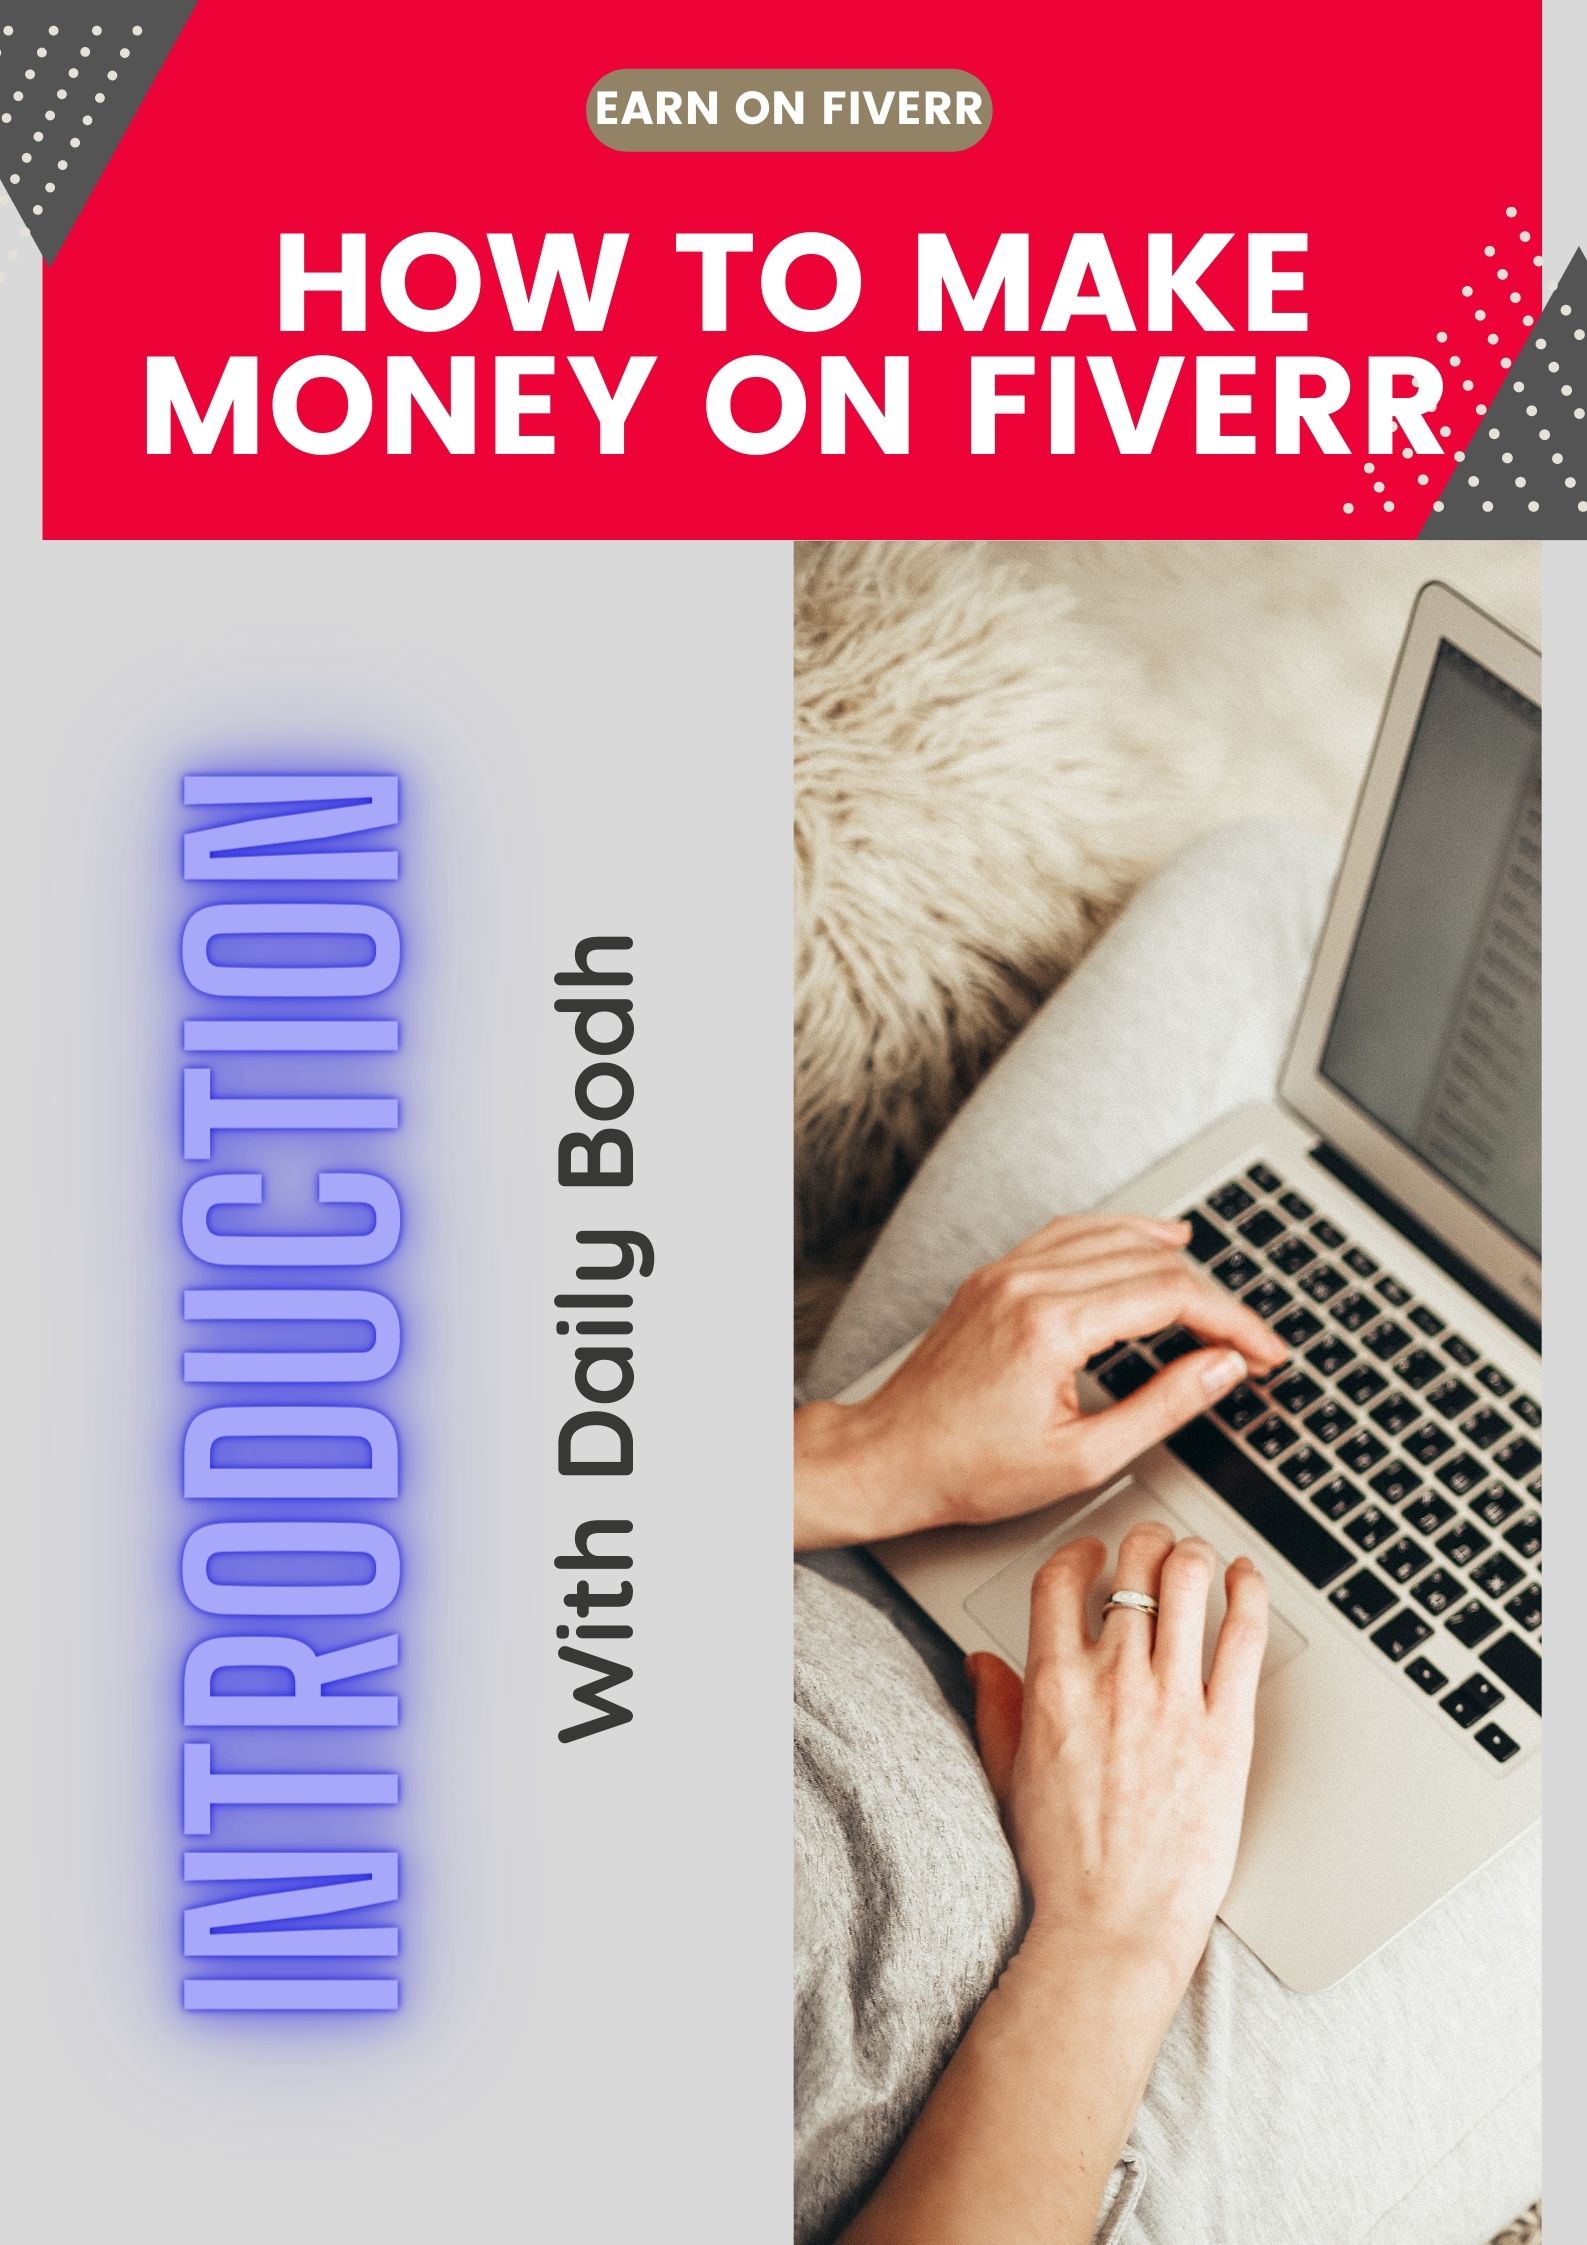 Introduction (How to make money on fiverr)